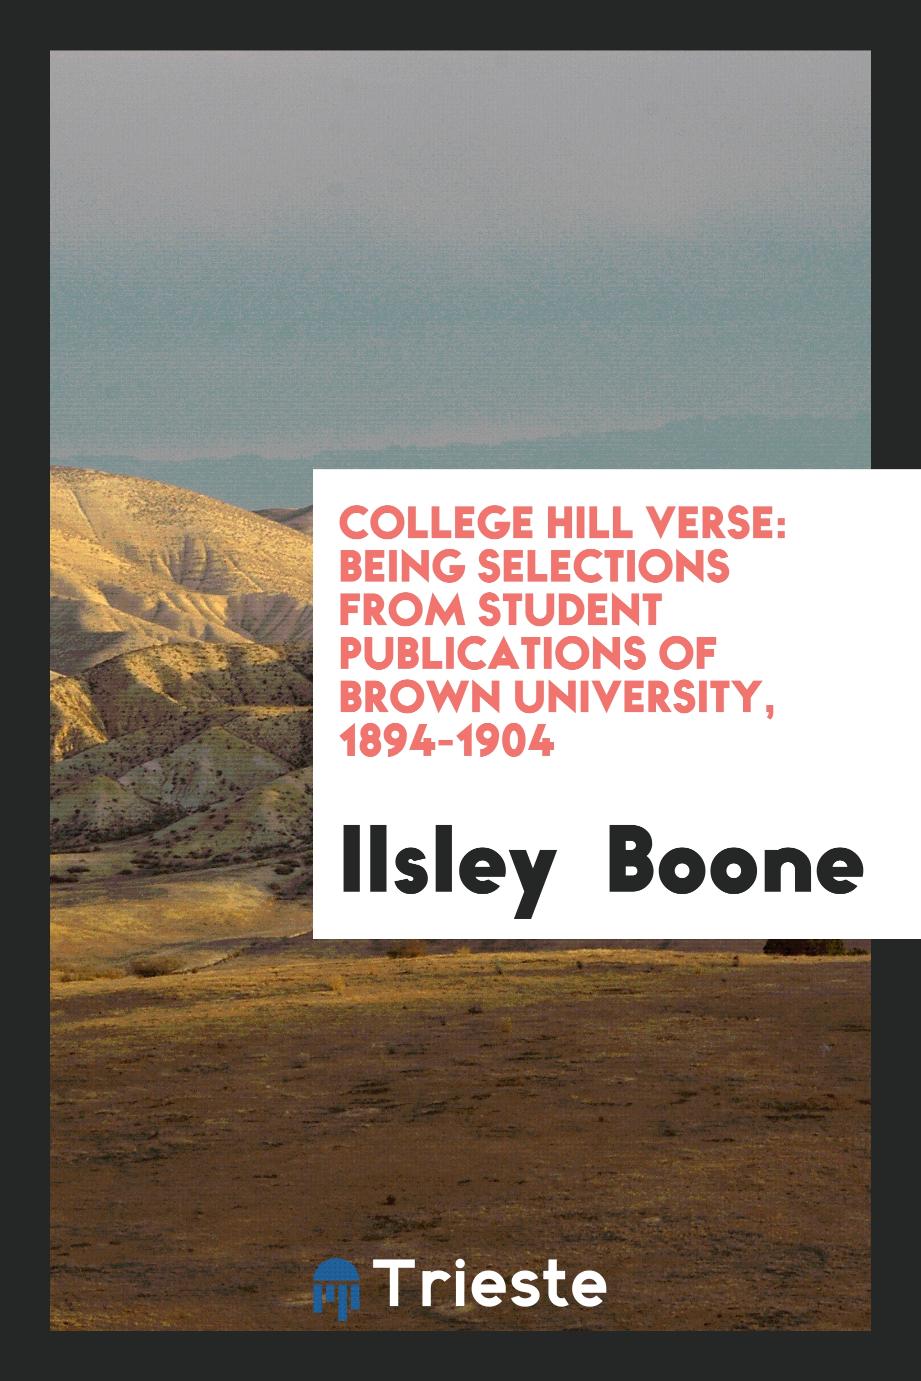 College Hill Verse: Being Selections from Student Publications of Brown University, 1894-1904